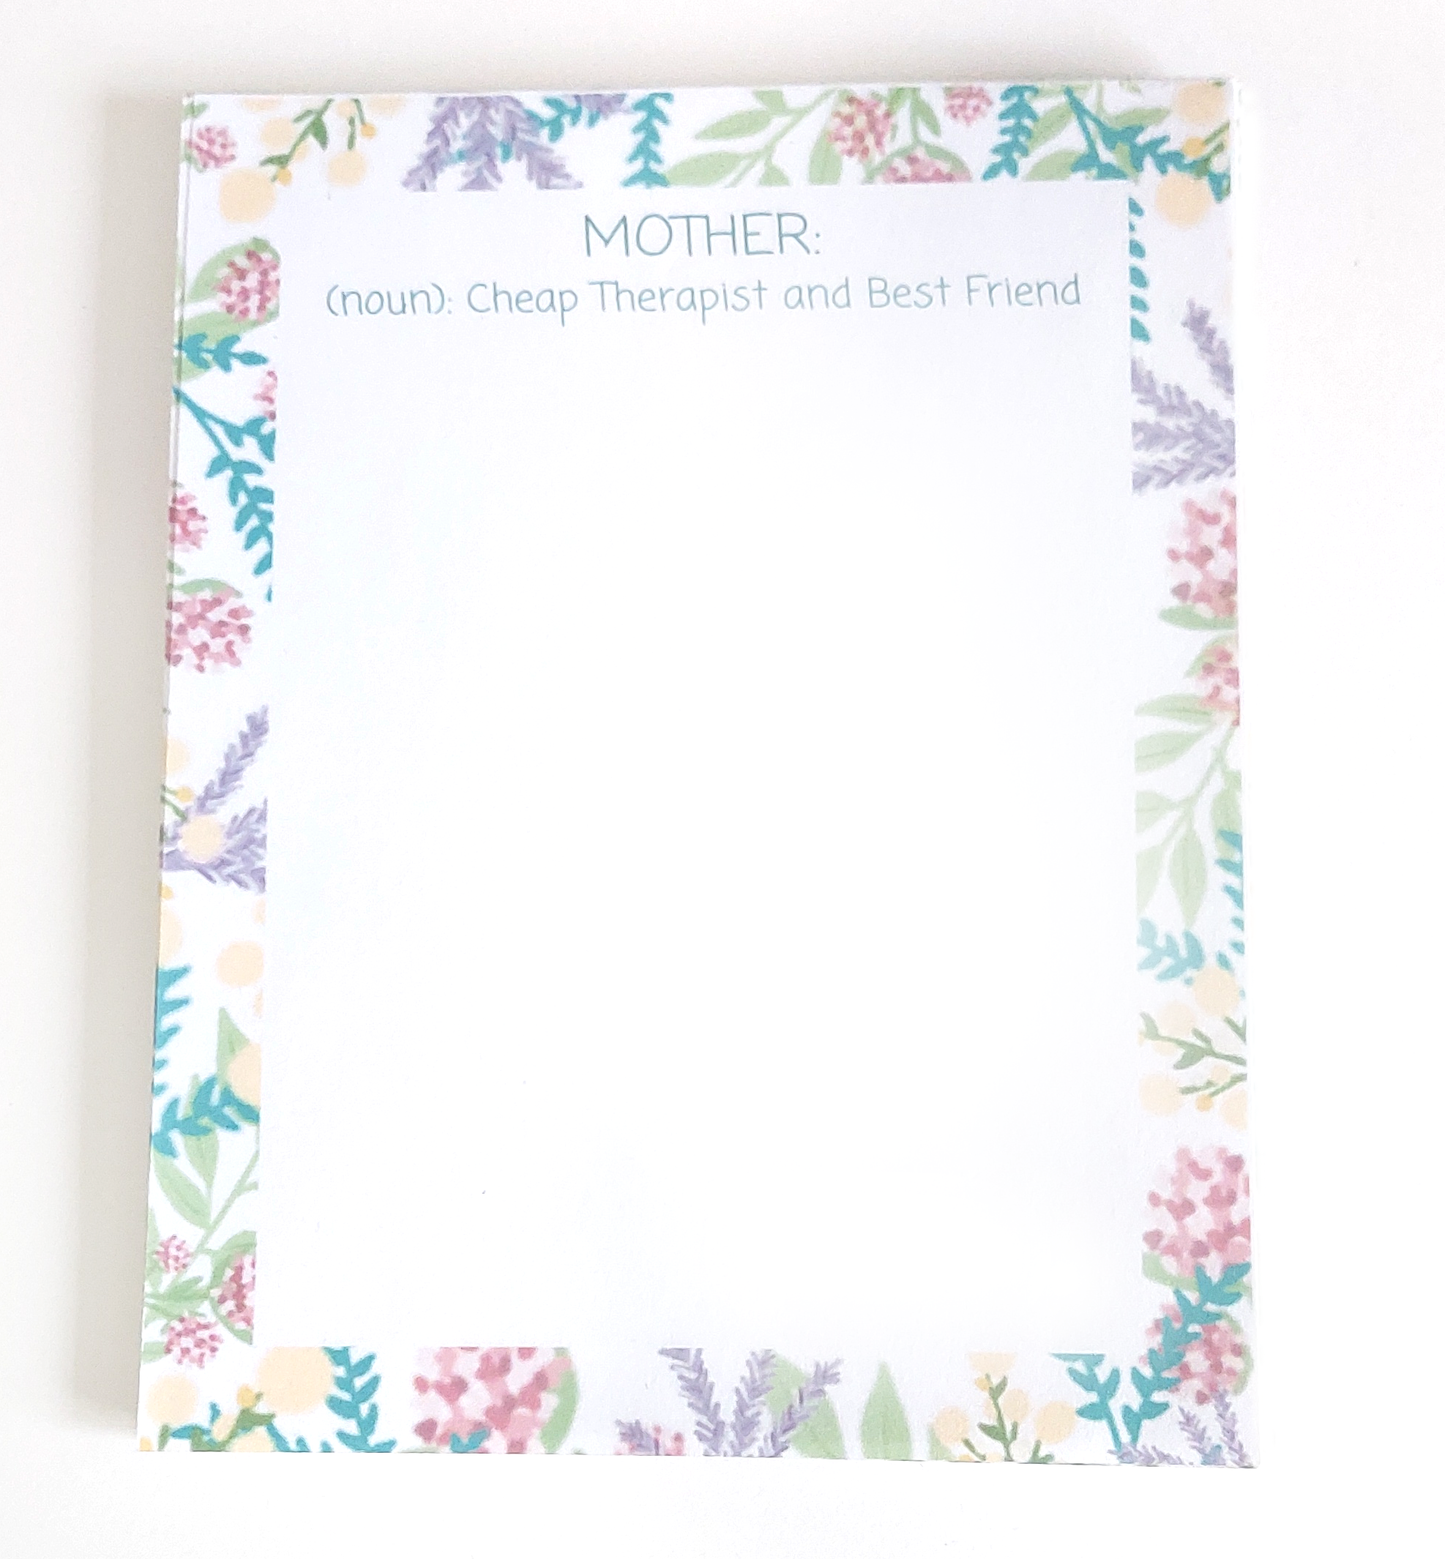 Mother "Cheap Therapist and Best Friend" - Notepad